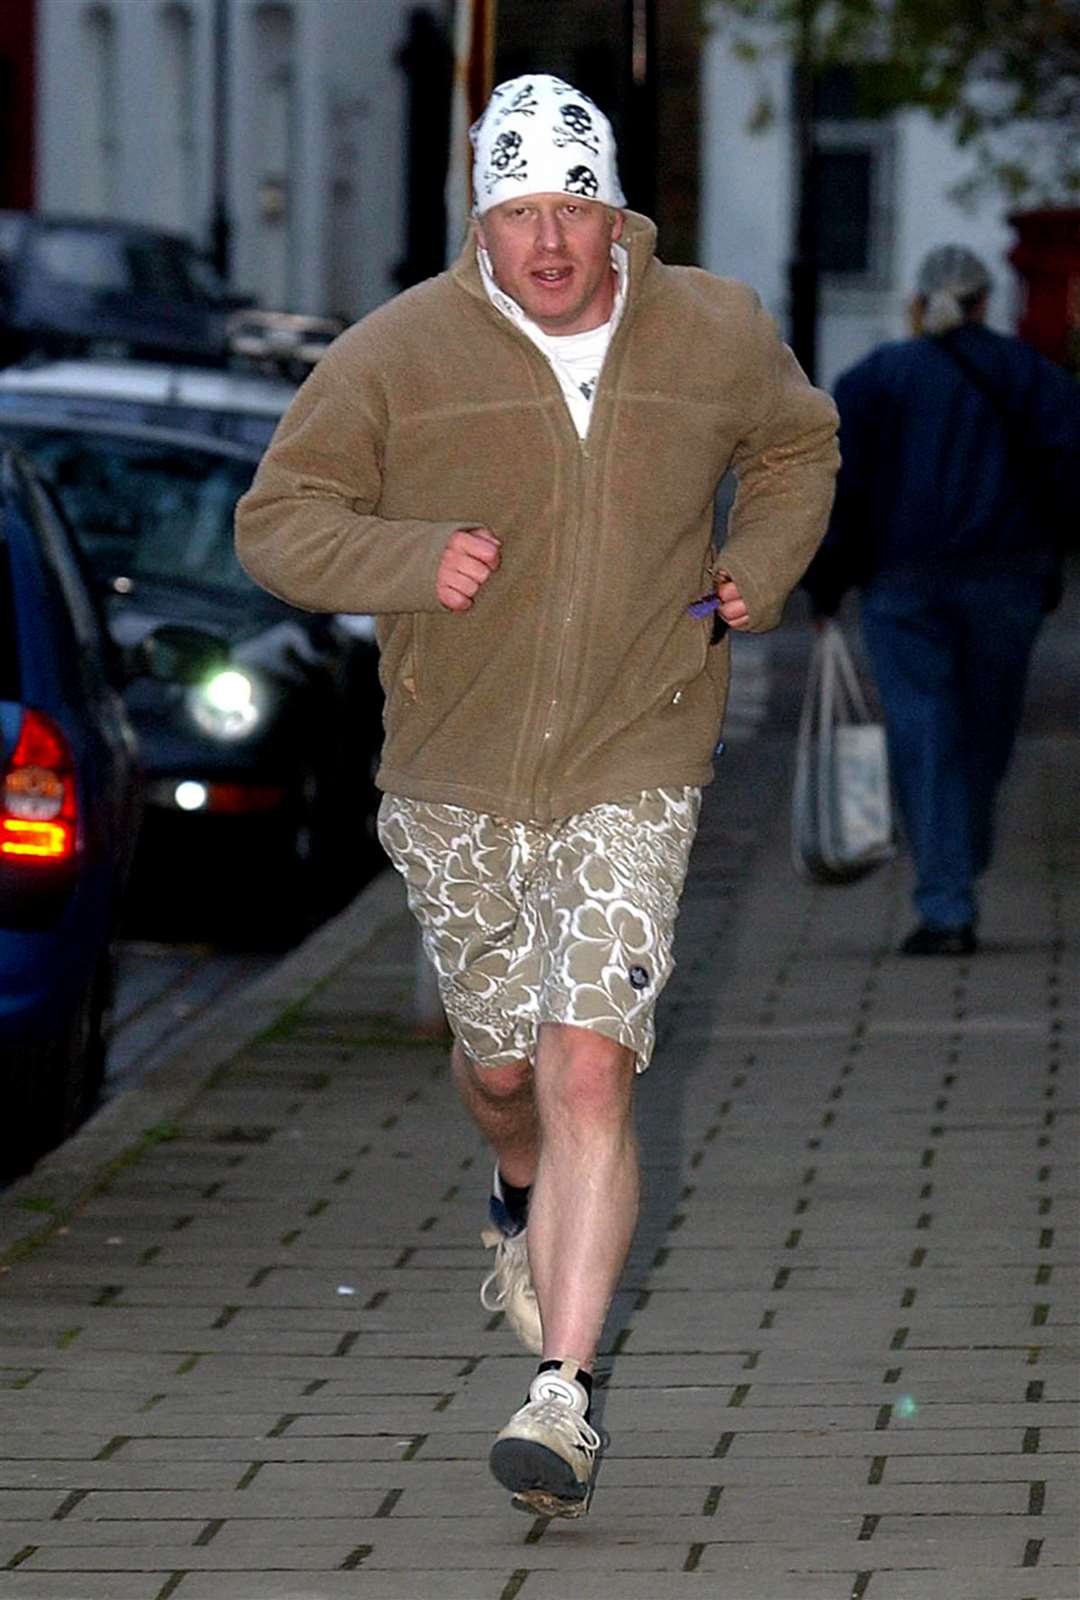 Boris Johnson on an early morning jog in 2004 after he was sacked from the shadow cabinet by Tory party leader Michael Howard, after revelations about his private life were published in a tabloid newspaper (Chris Young/PA)